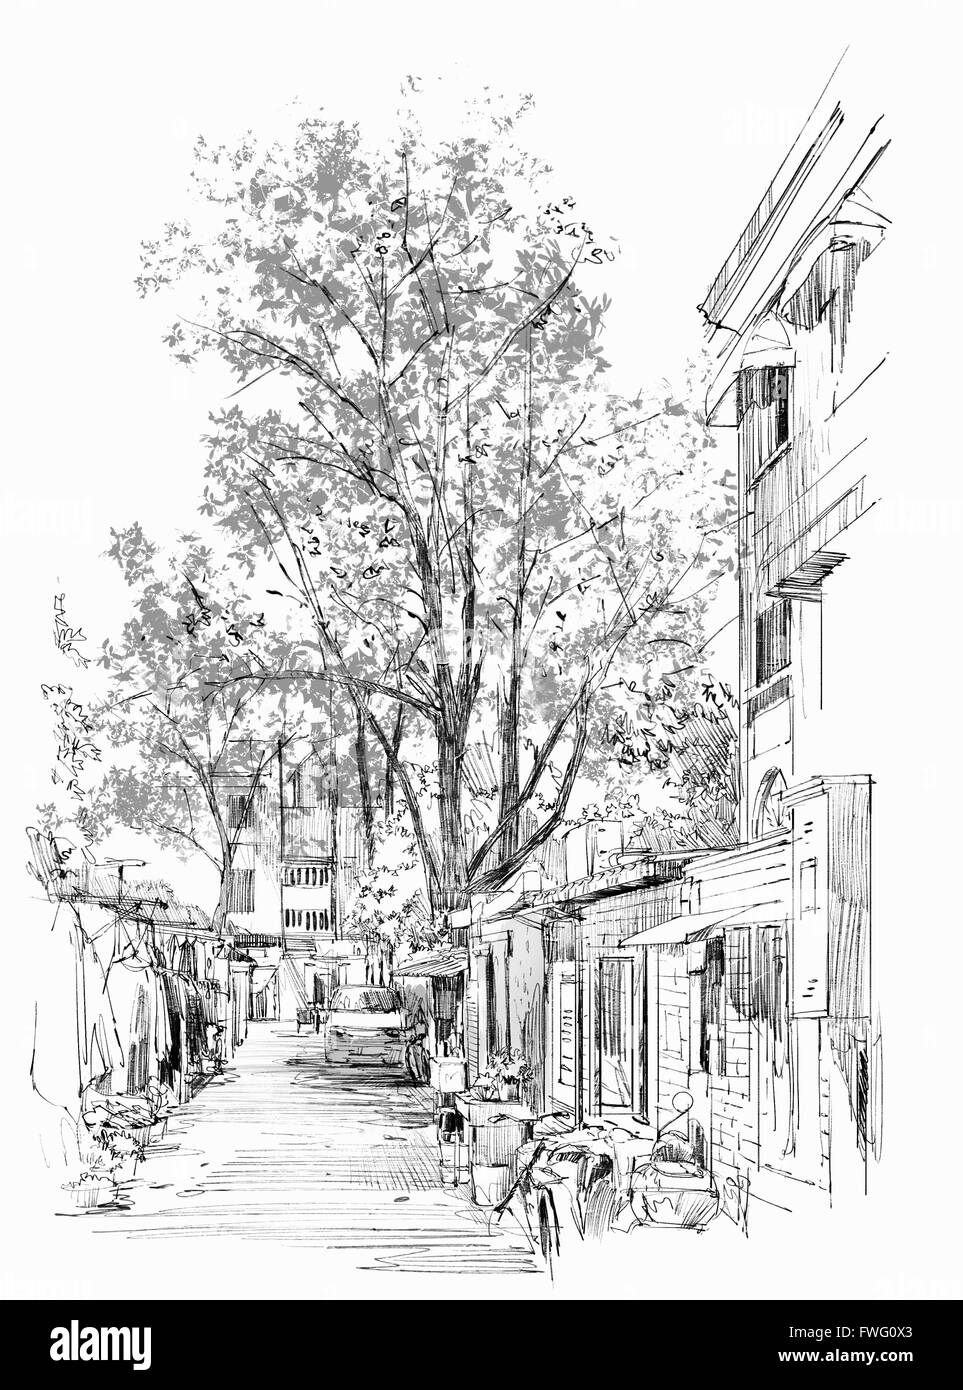 sketch of narrow street with old buildings in China Stock Photo